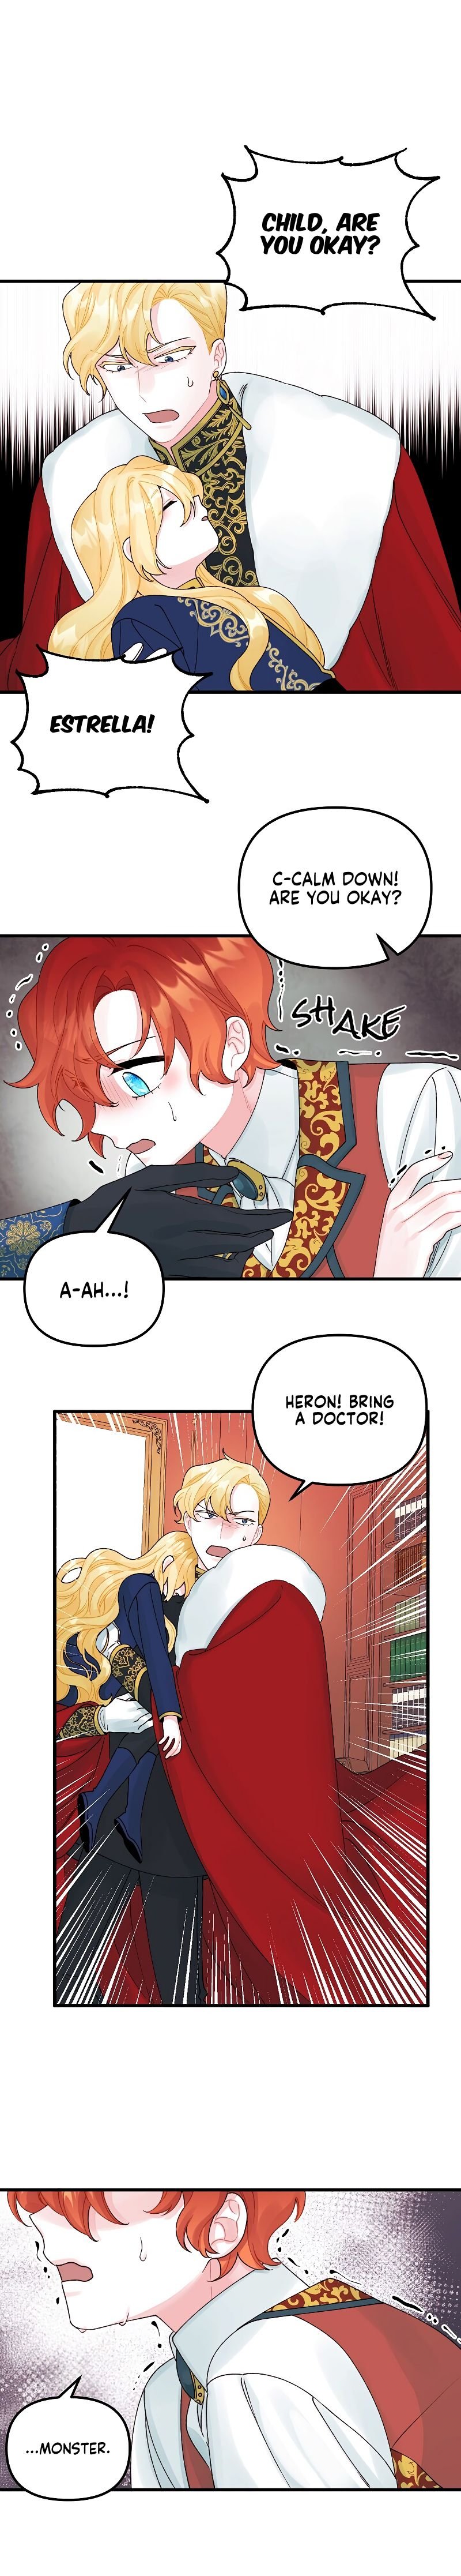 the-princess-in-the-dumpster-chap-37-13